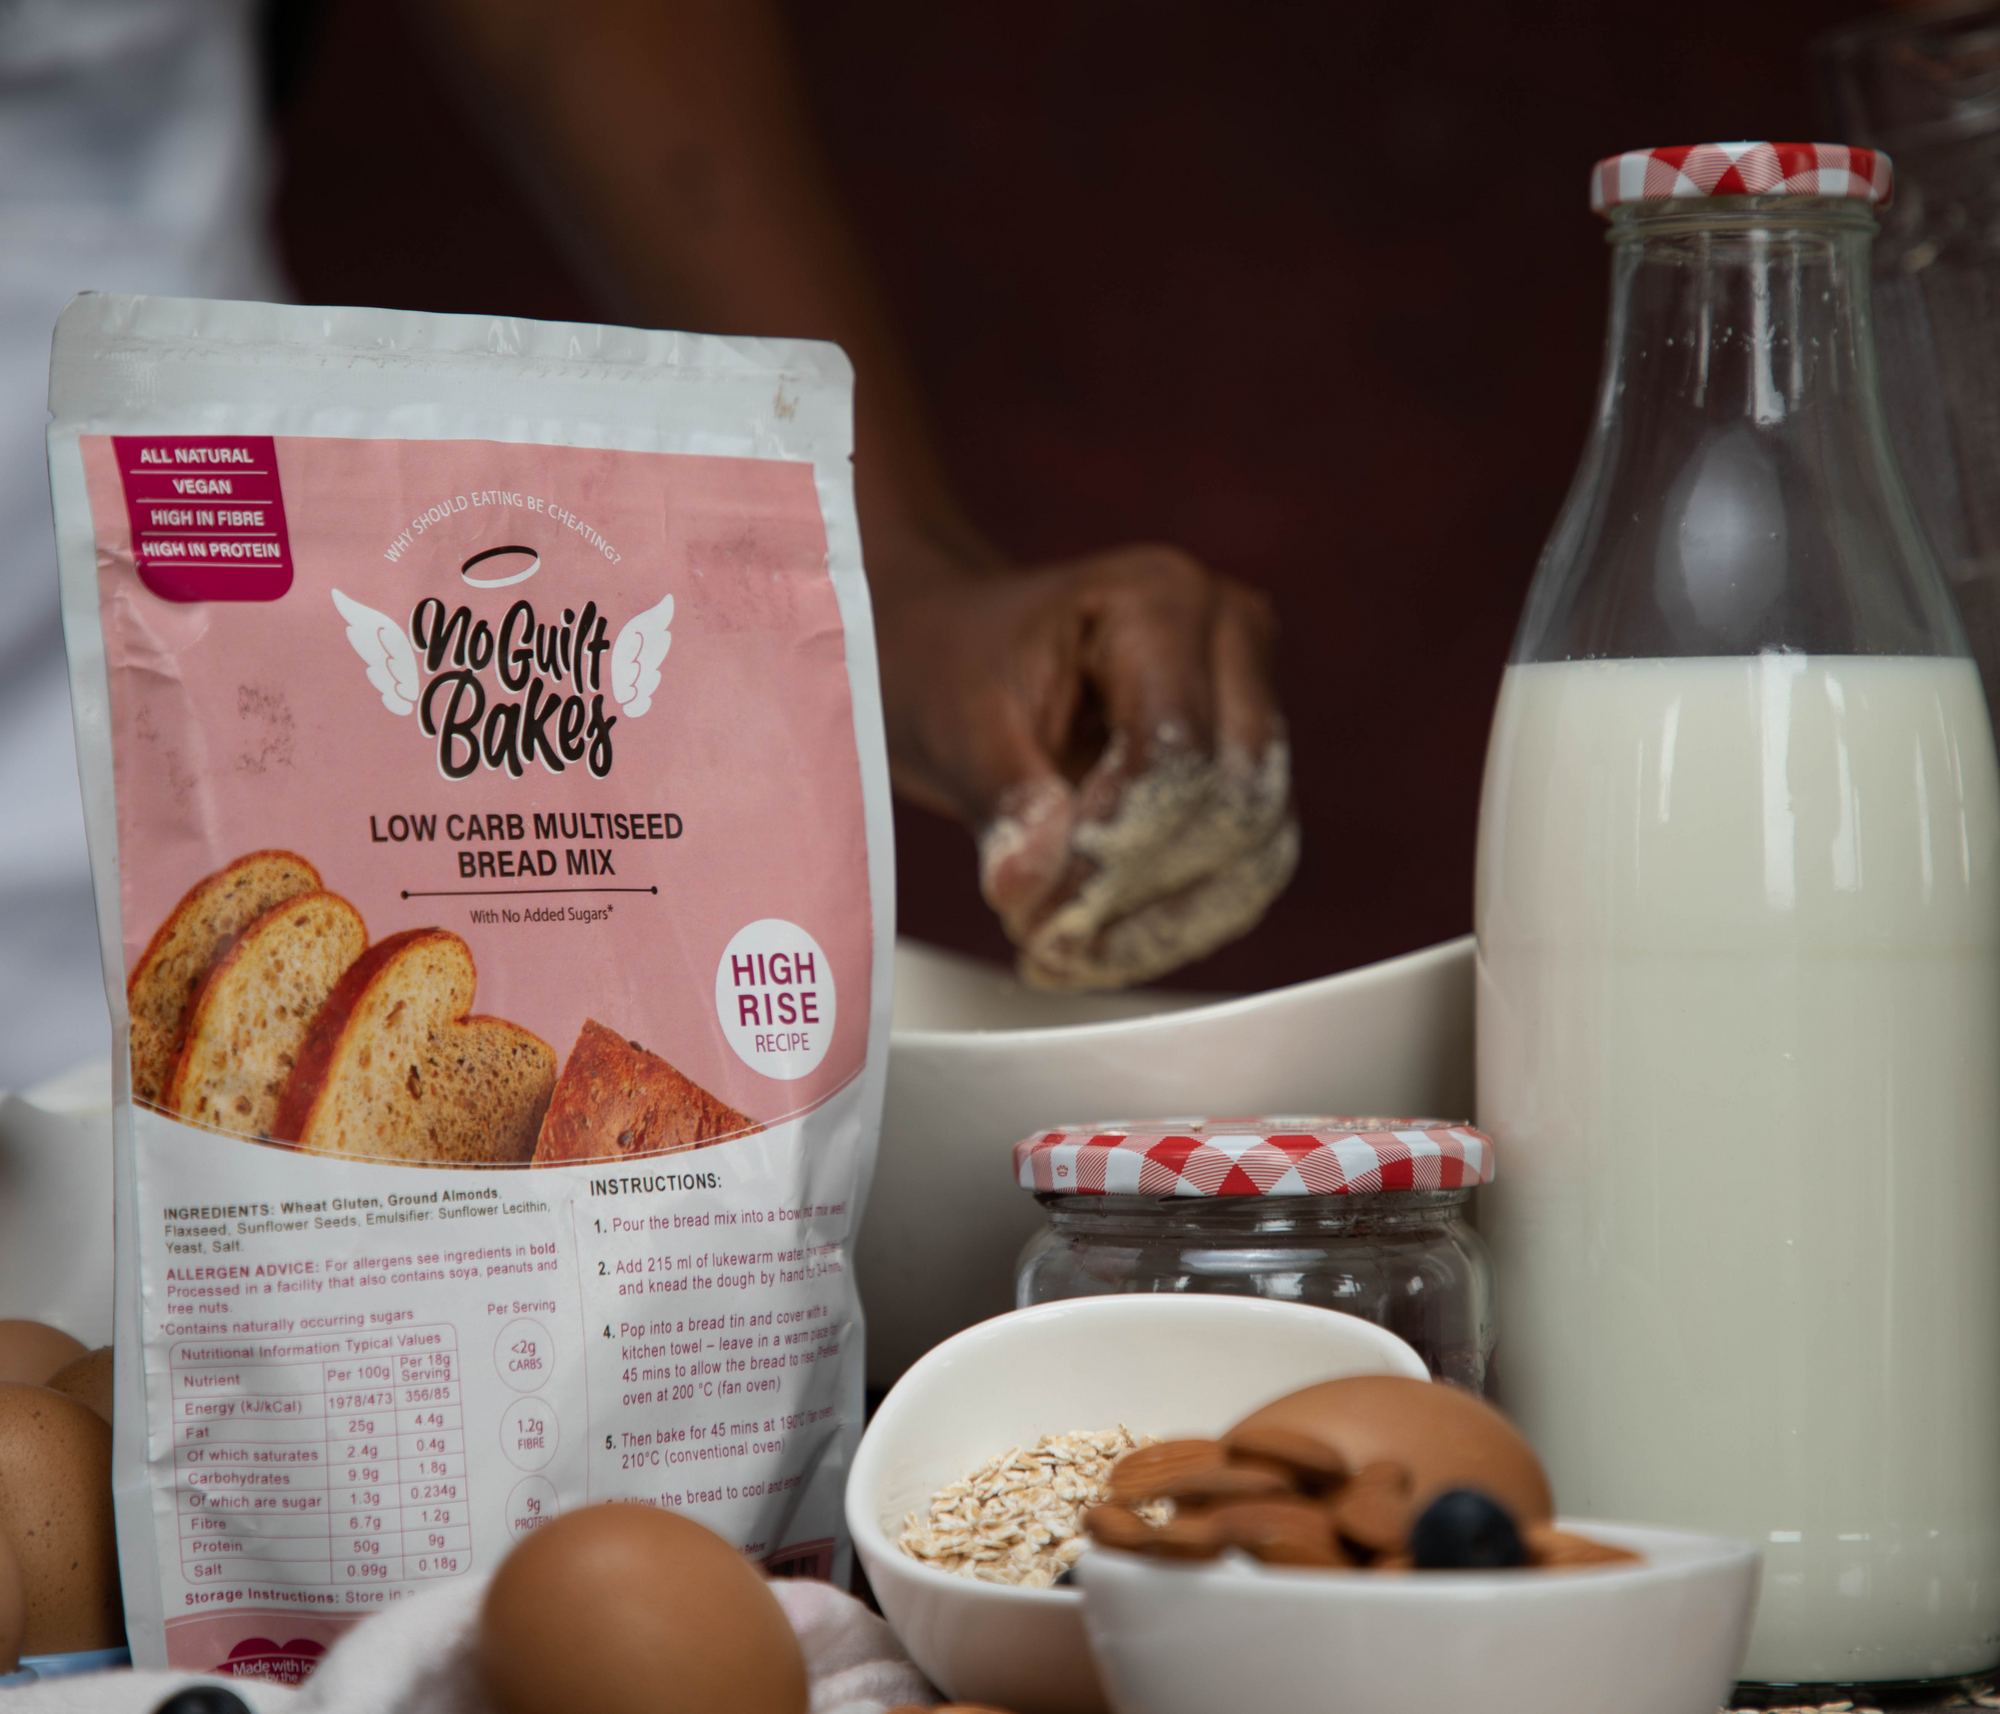 An image of bread being mixed in the background with the No Guilt Bakes bread mix in the foreground